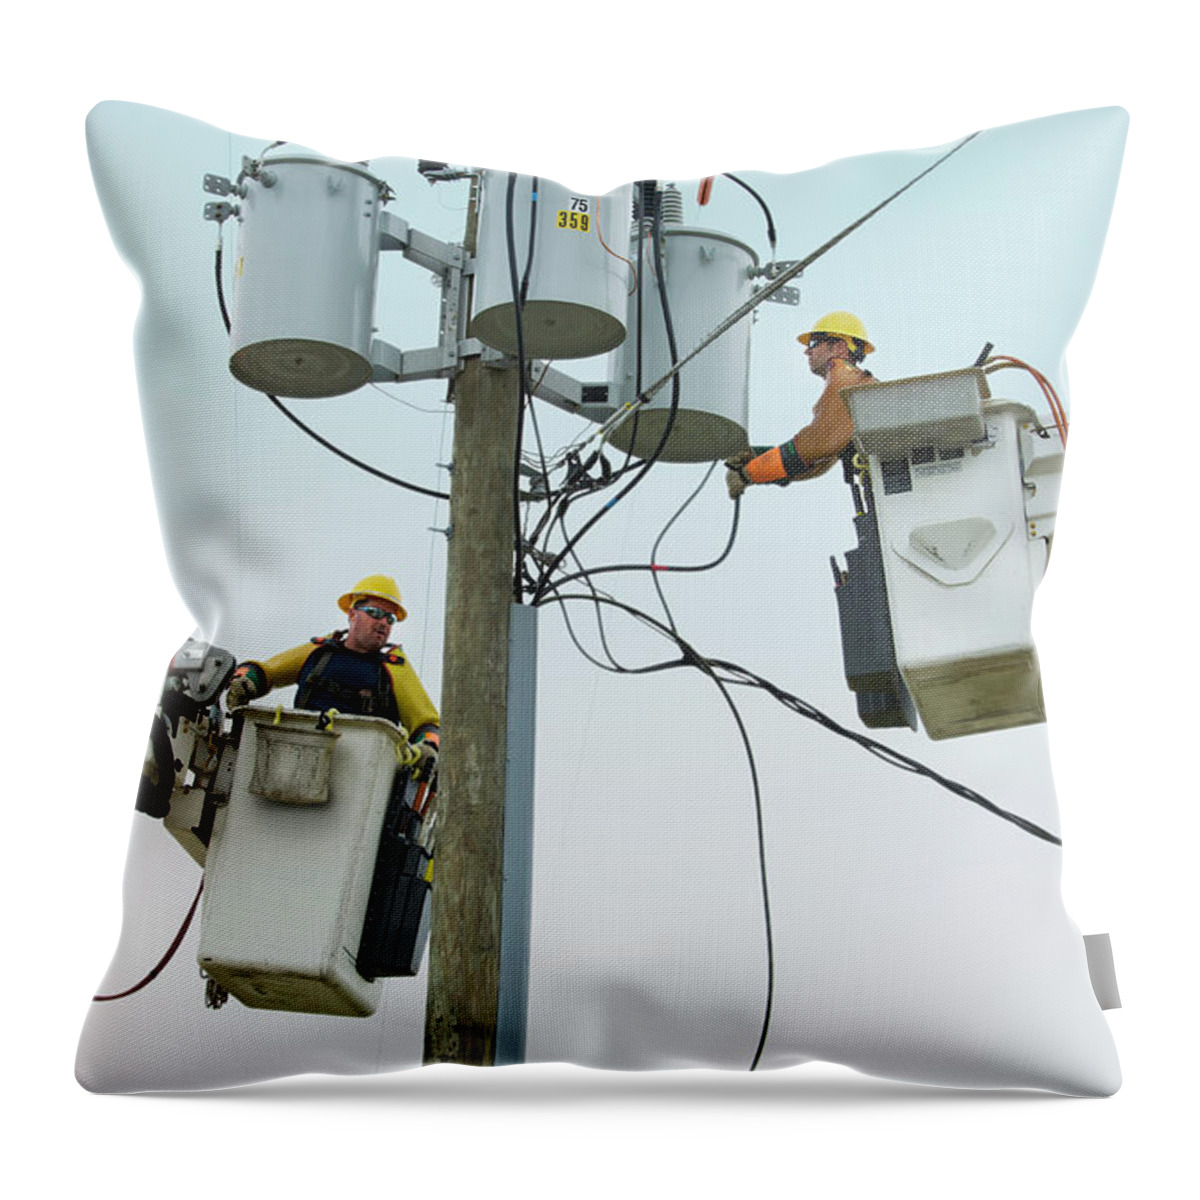 Working Throw Pillow featuring the photograph Caucasian Workers In Cherry Pickers by Ariel Skelley